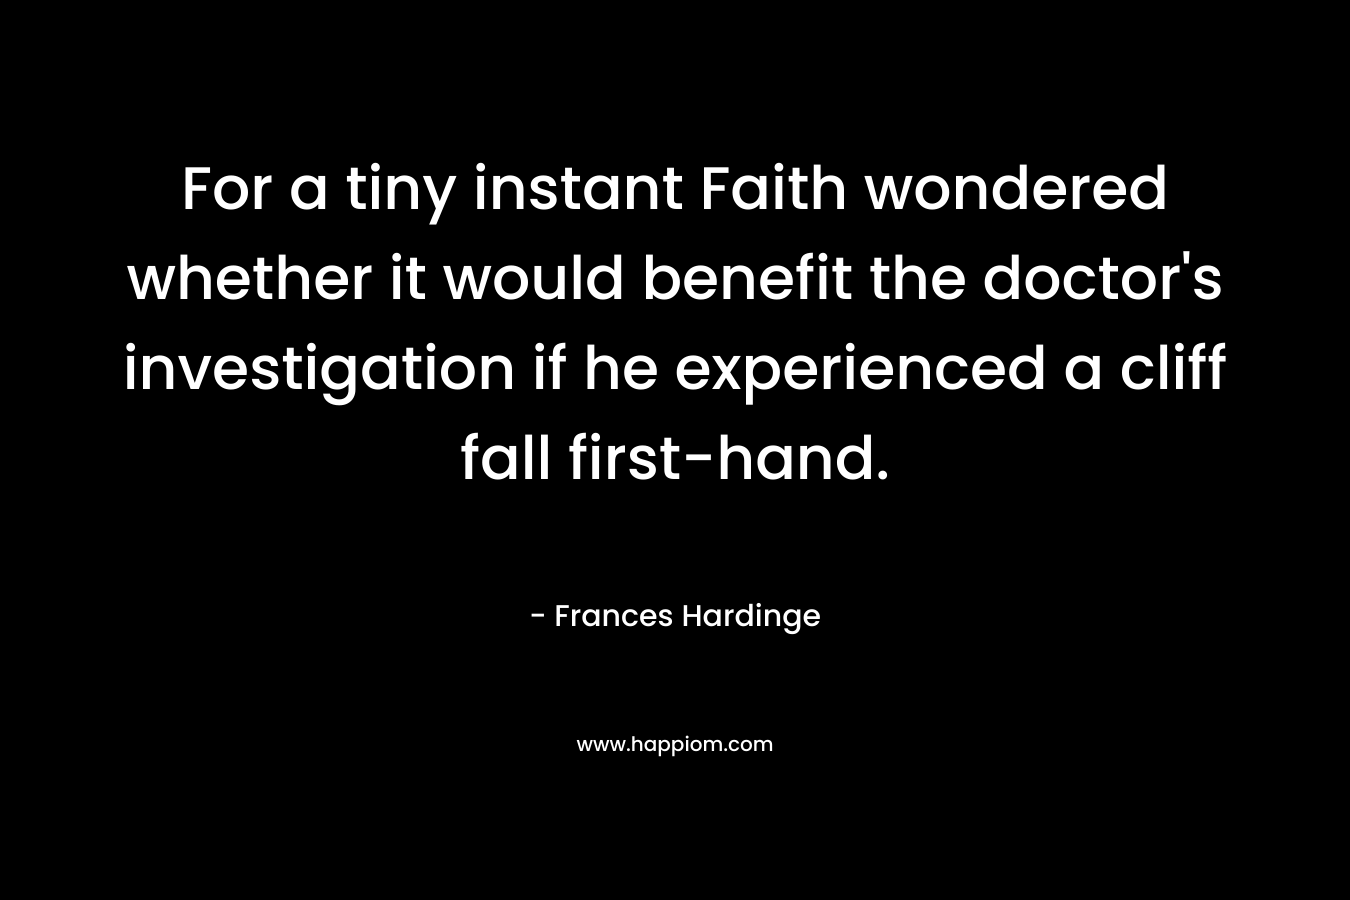 For a tiny instant Faith wondered whether it would benefit the doctor's investigation if he experienced a cliff fall first-hand.